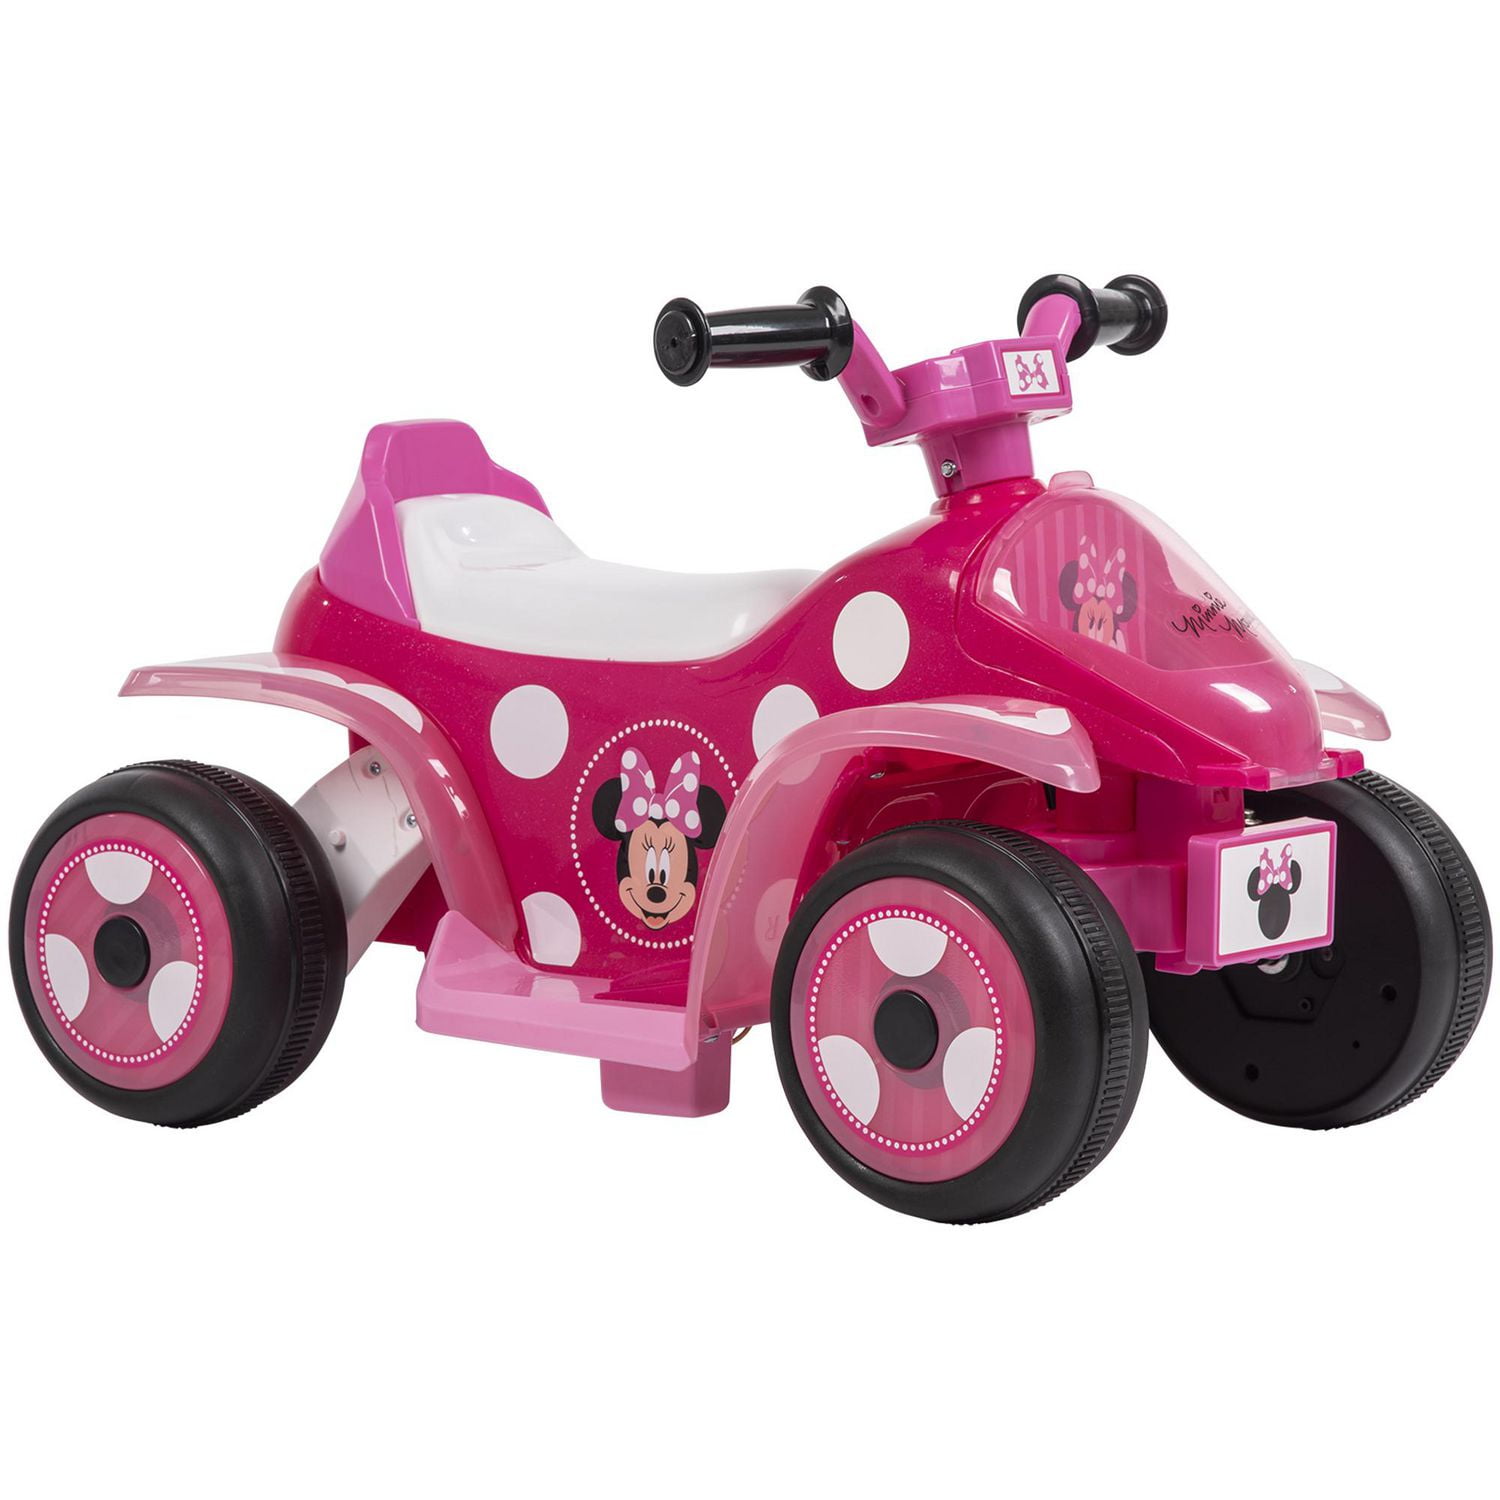 Disney Minnie 6-volt Ride-On Quad for Girls by Huffy, Pink